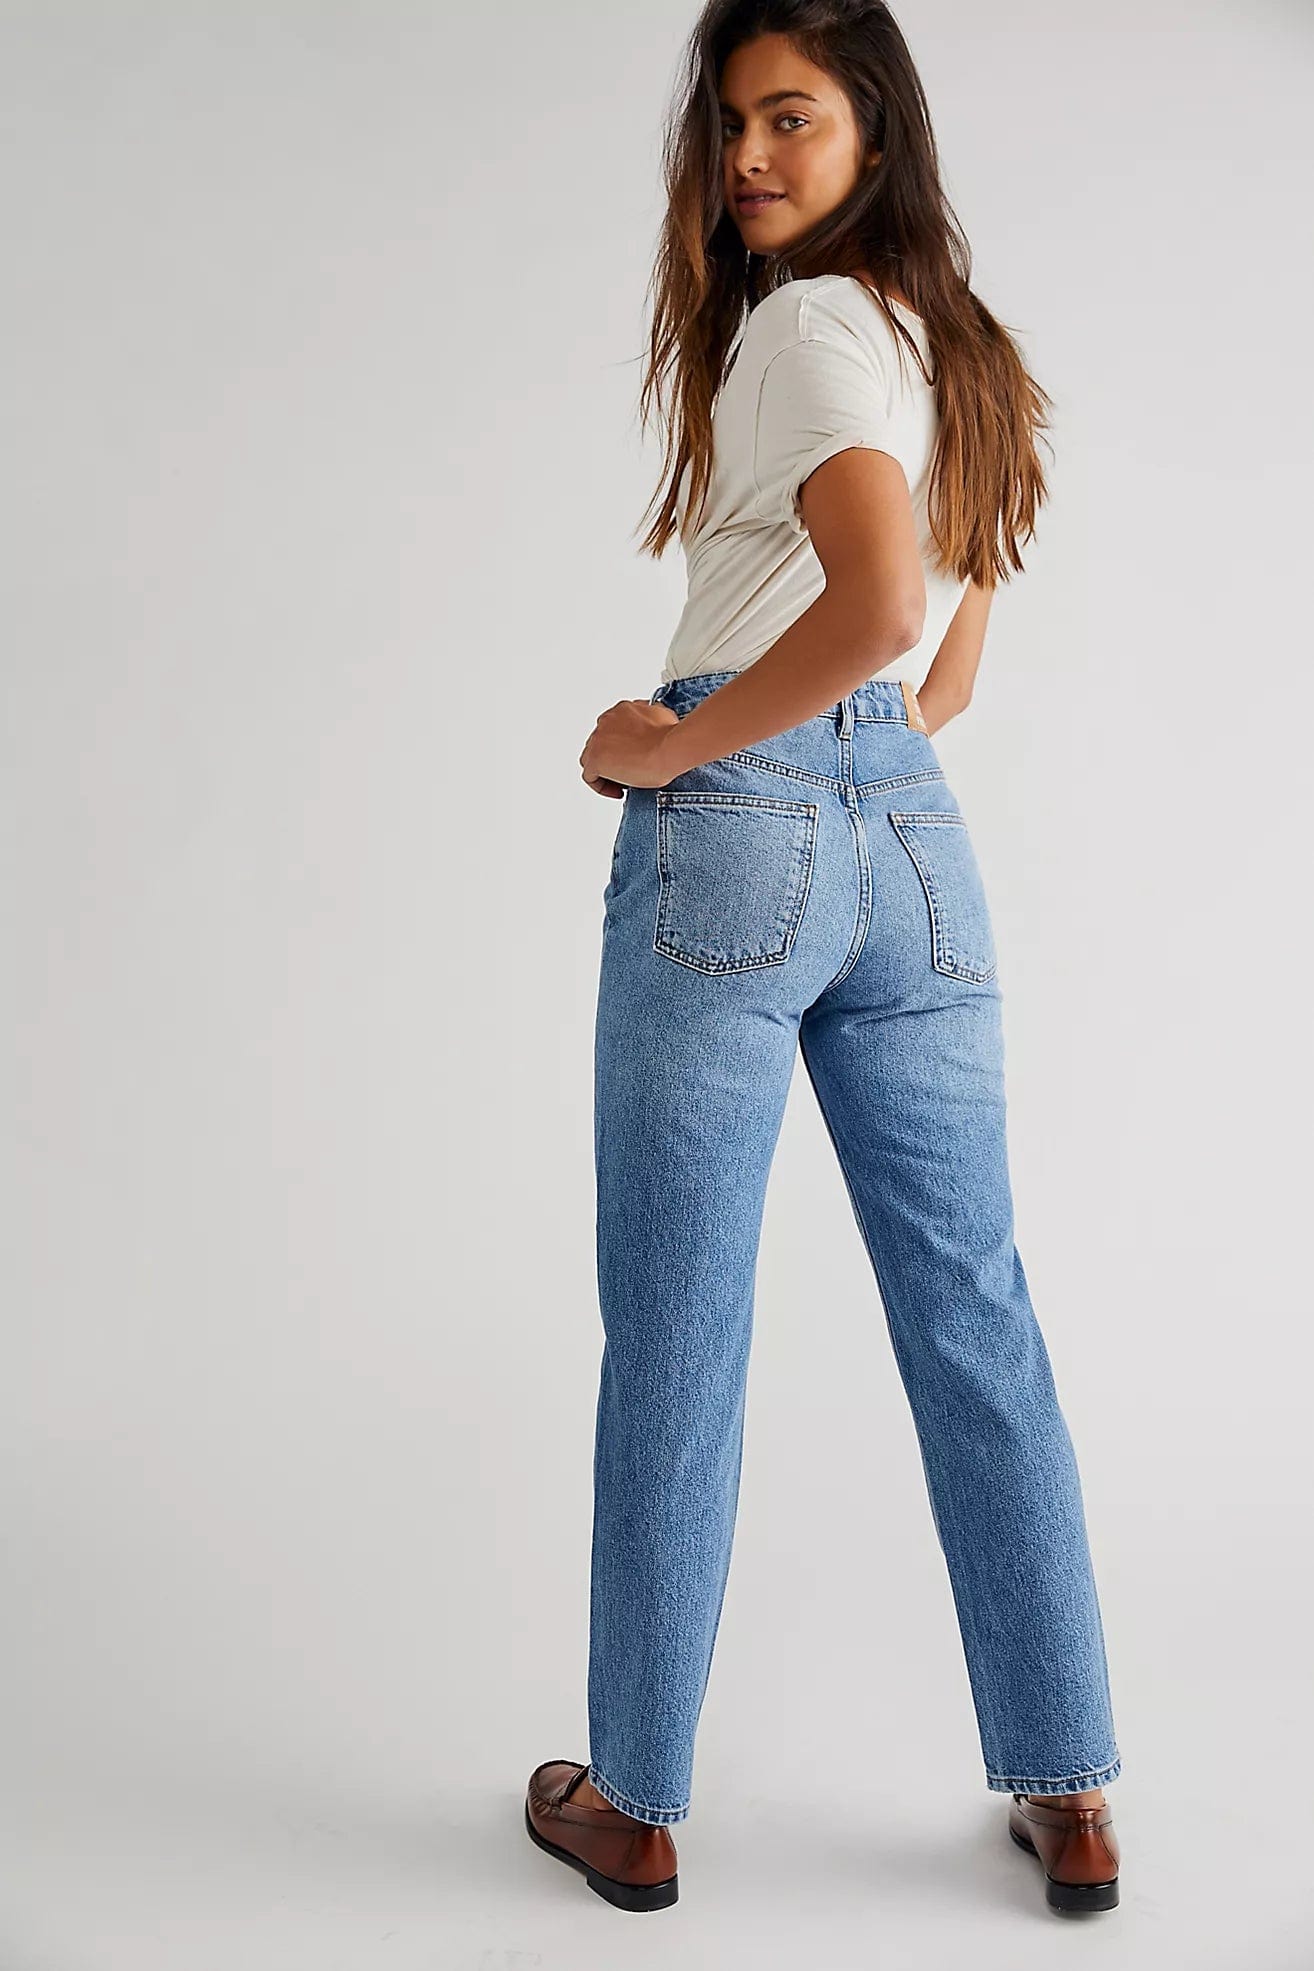 Free People Pacifica Straight-Leg Jeans